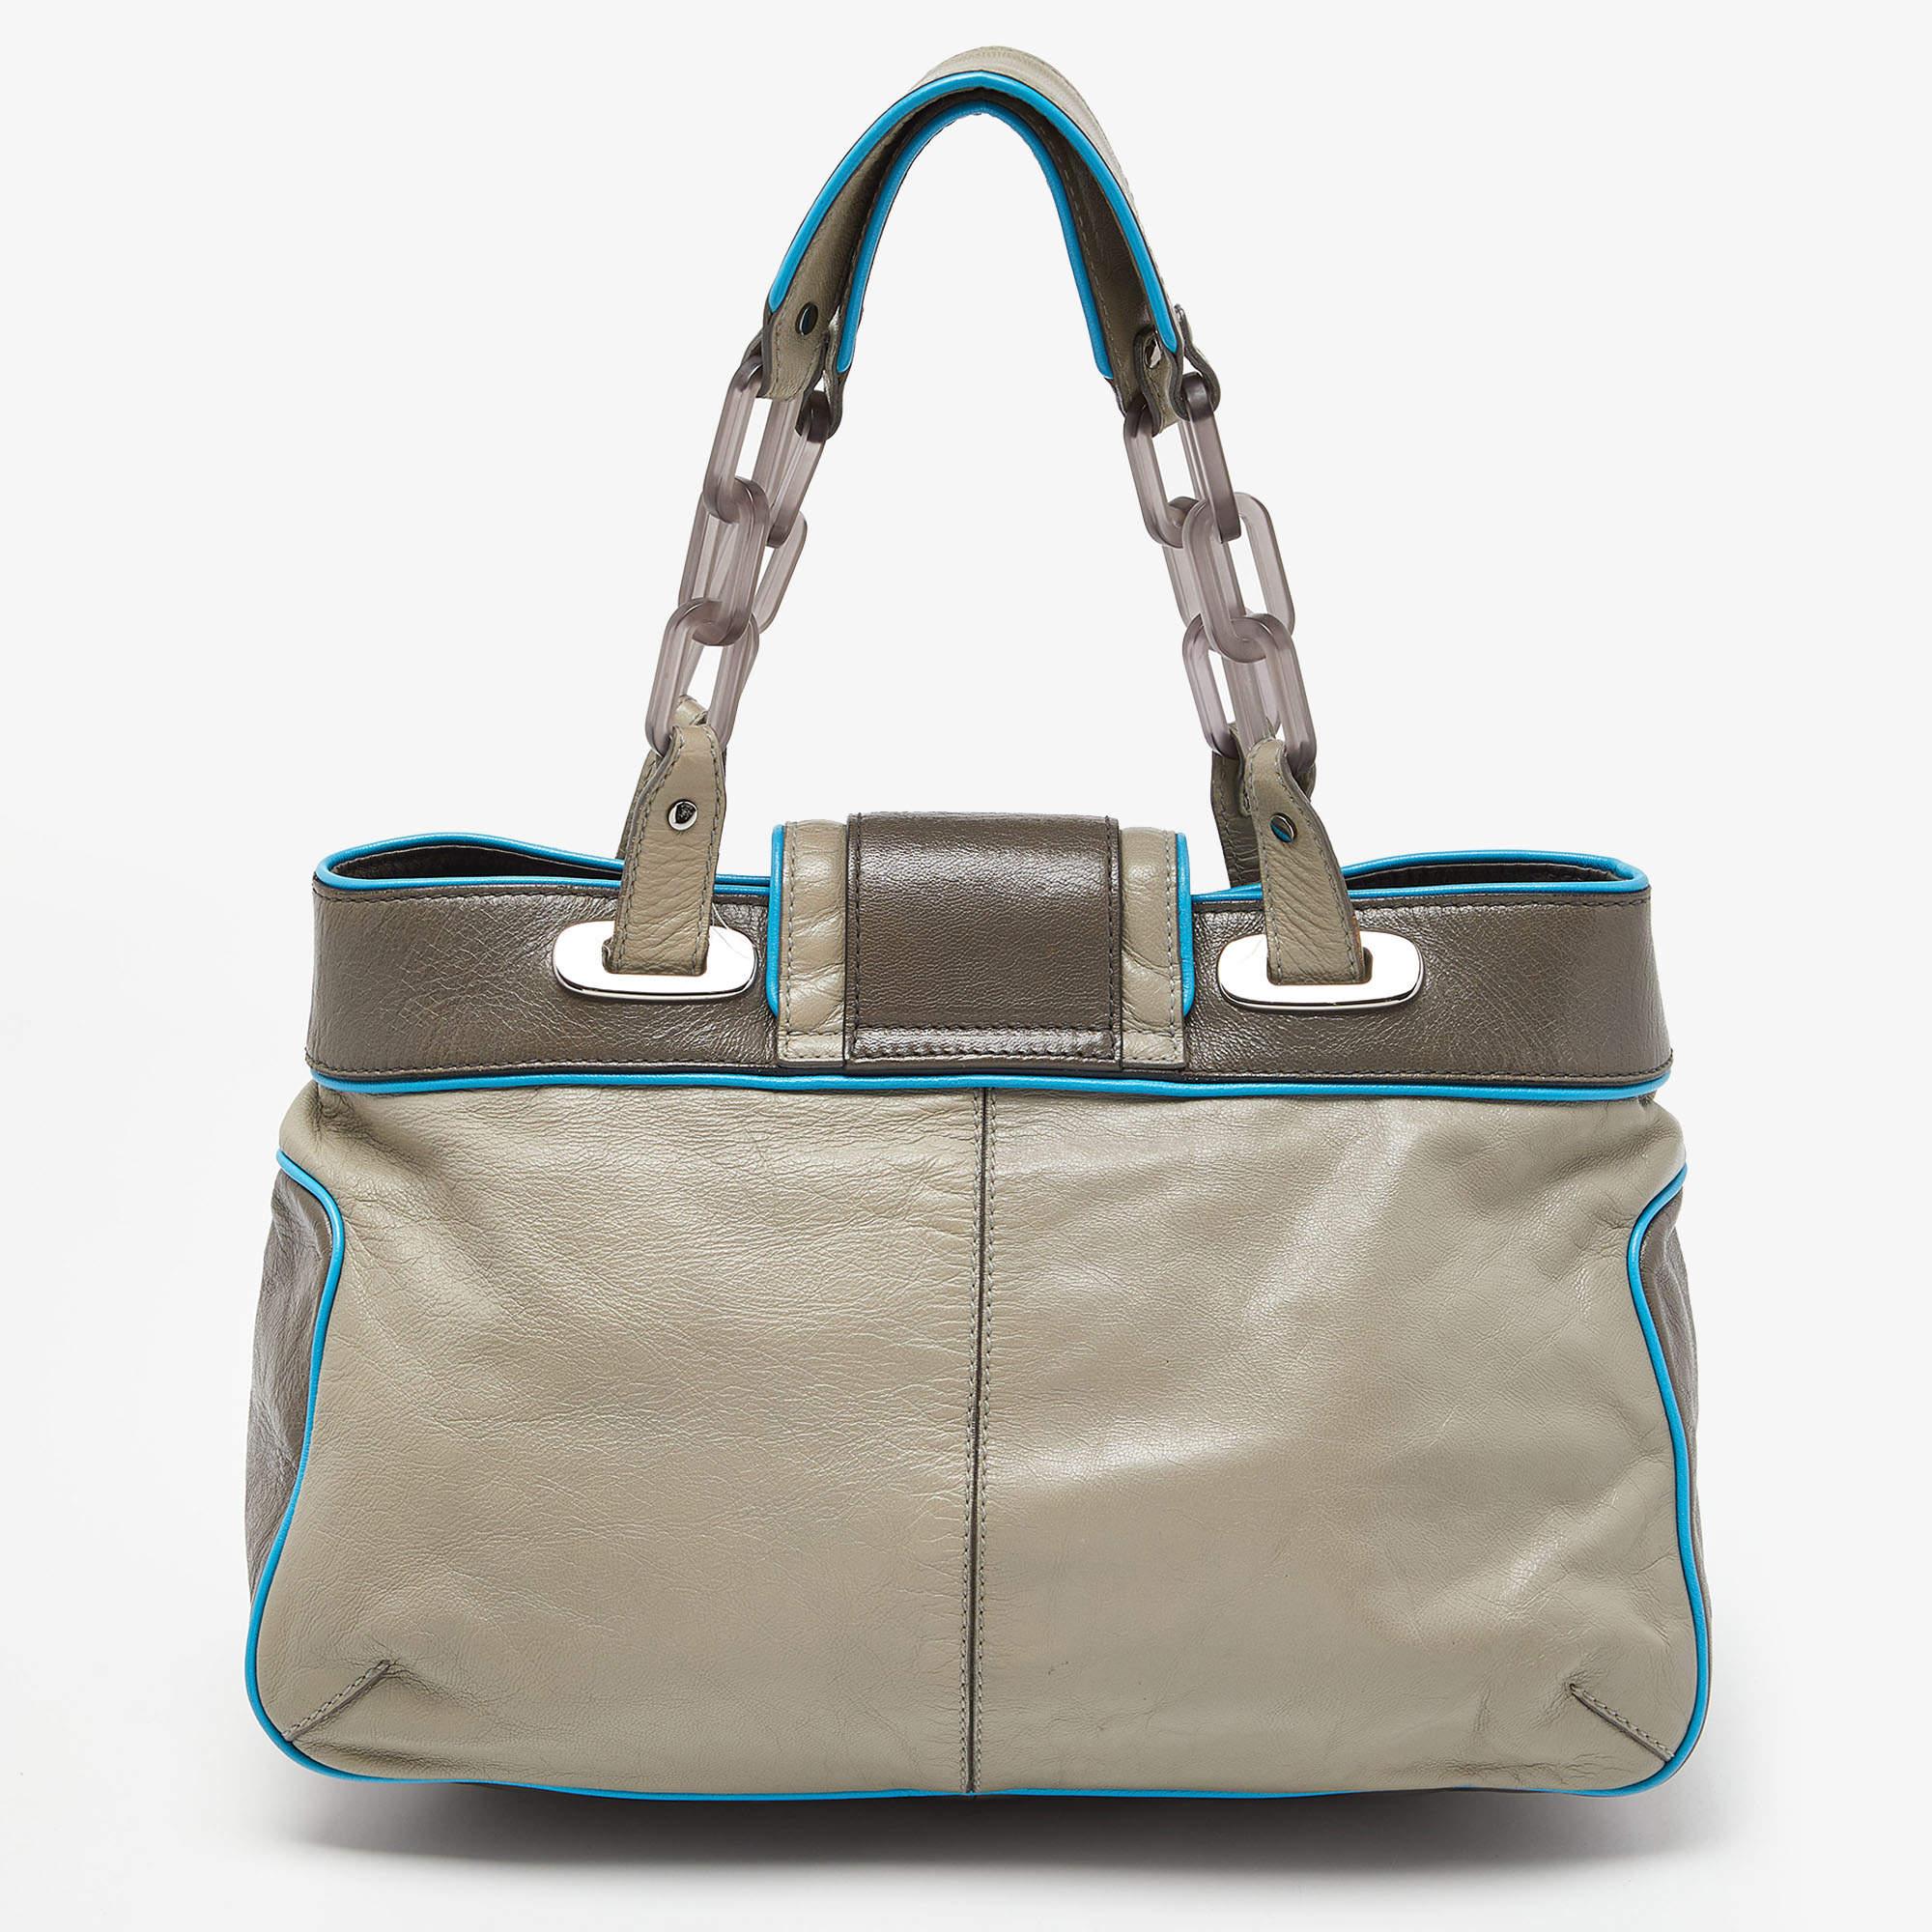 Designer bags are ideal companions for ample occasions! Here we have a fashion-meets-functionality piece crafted with precision. It has been equipped with a well-sized interior that can easily fit all your essentials.

Includes: Detachable Strap